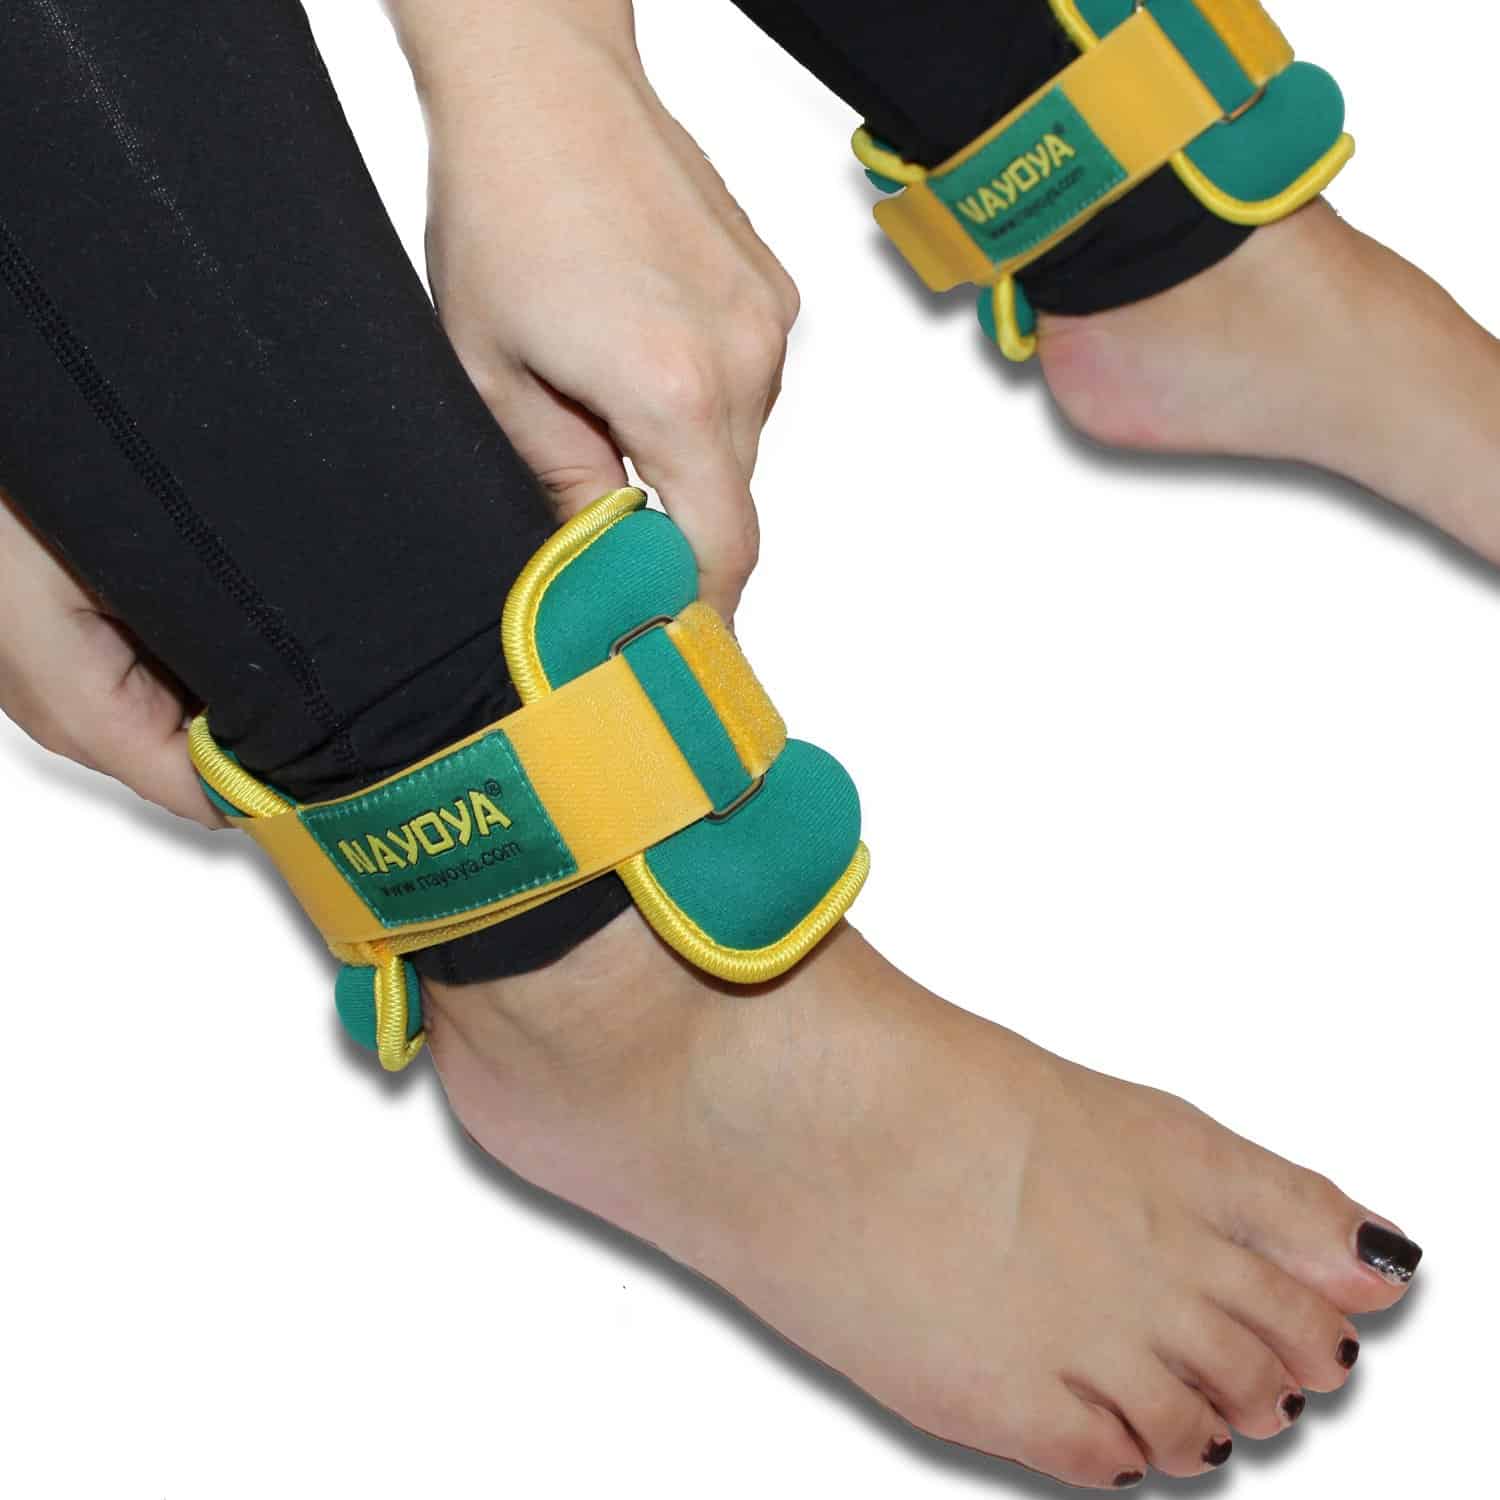 Nayoya 3 Pound Ankle Weights Set and Carry Pouch – Premium High-Quality Adjustable Ankle and Wrist Cuffs